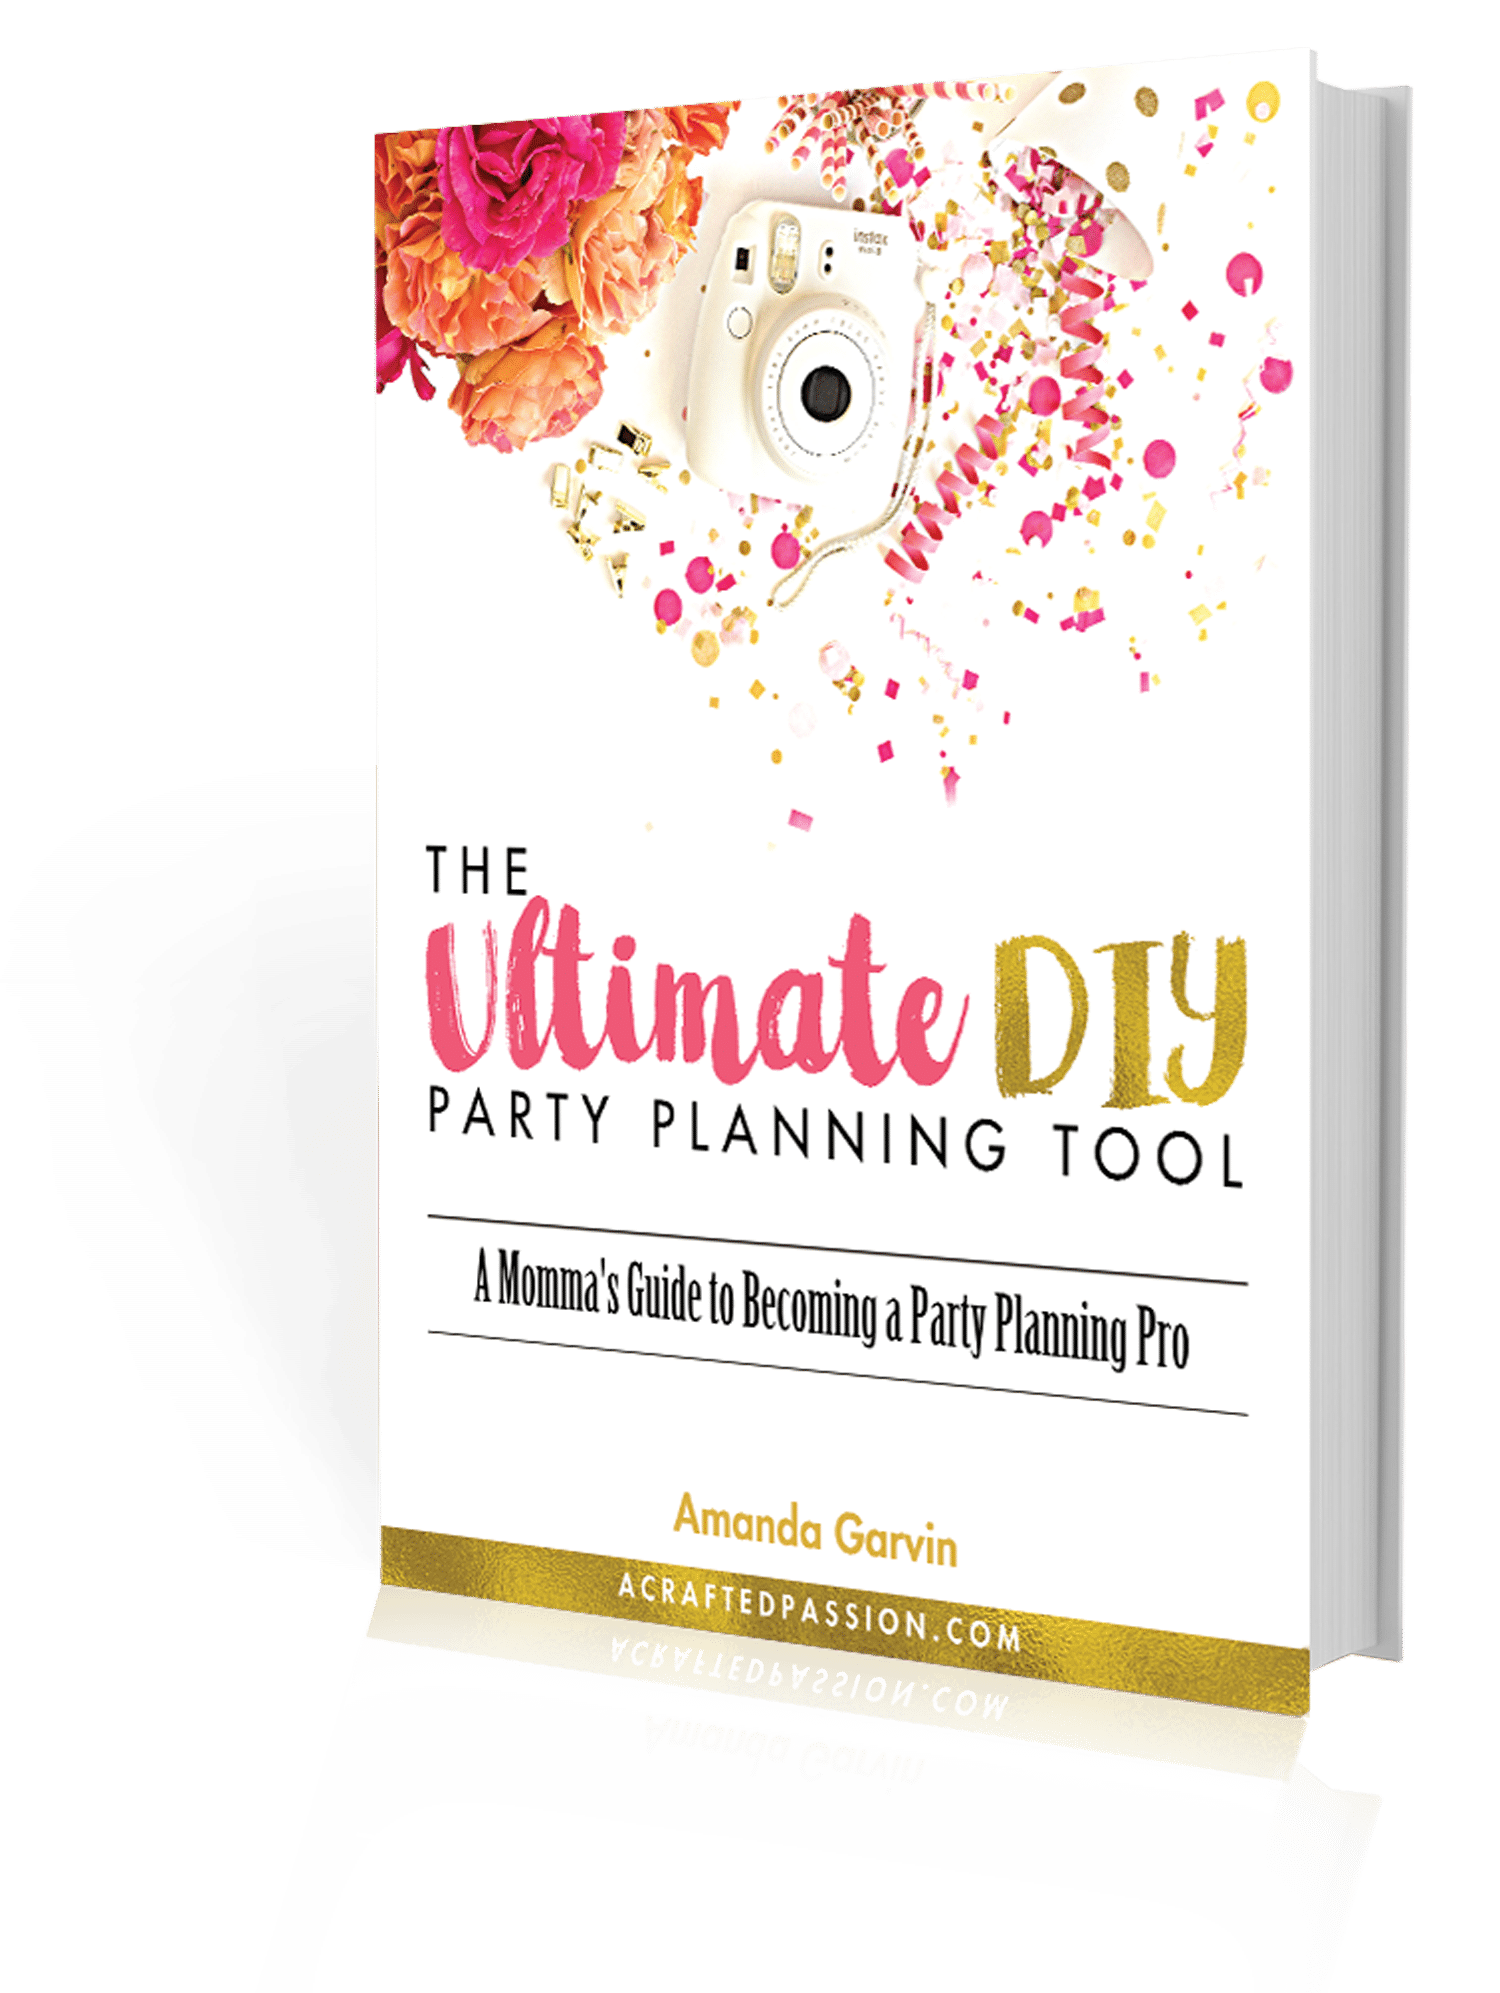 The Ultimate DIY Party Planning Tool